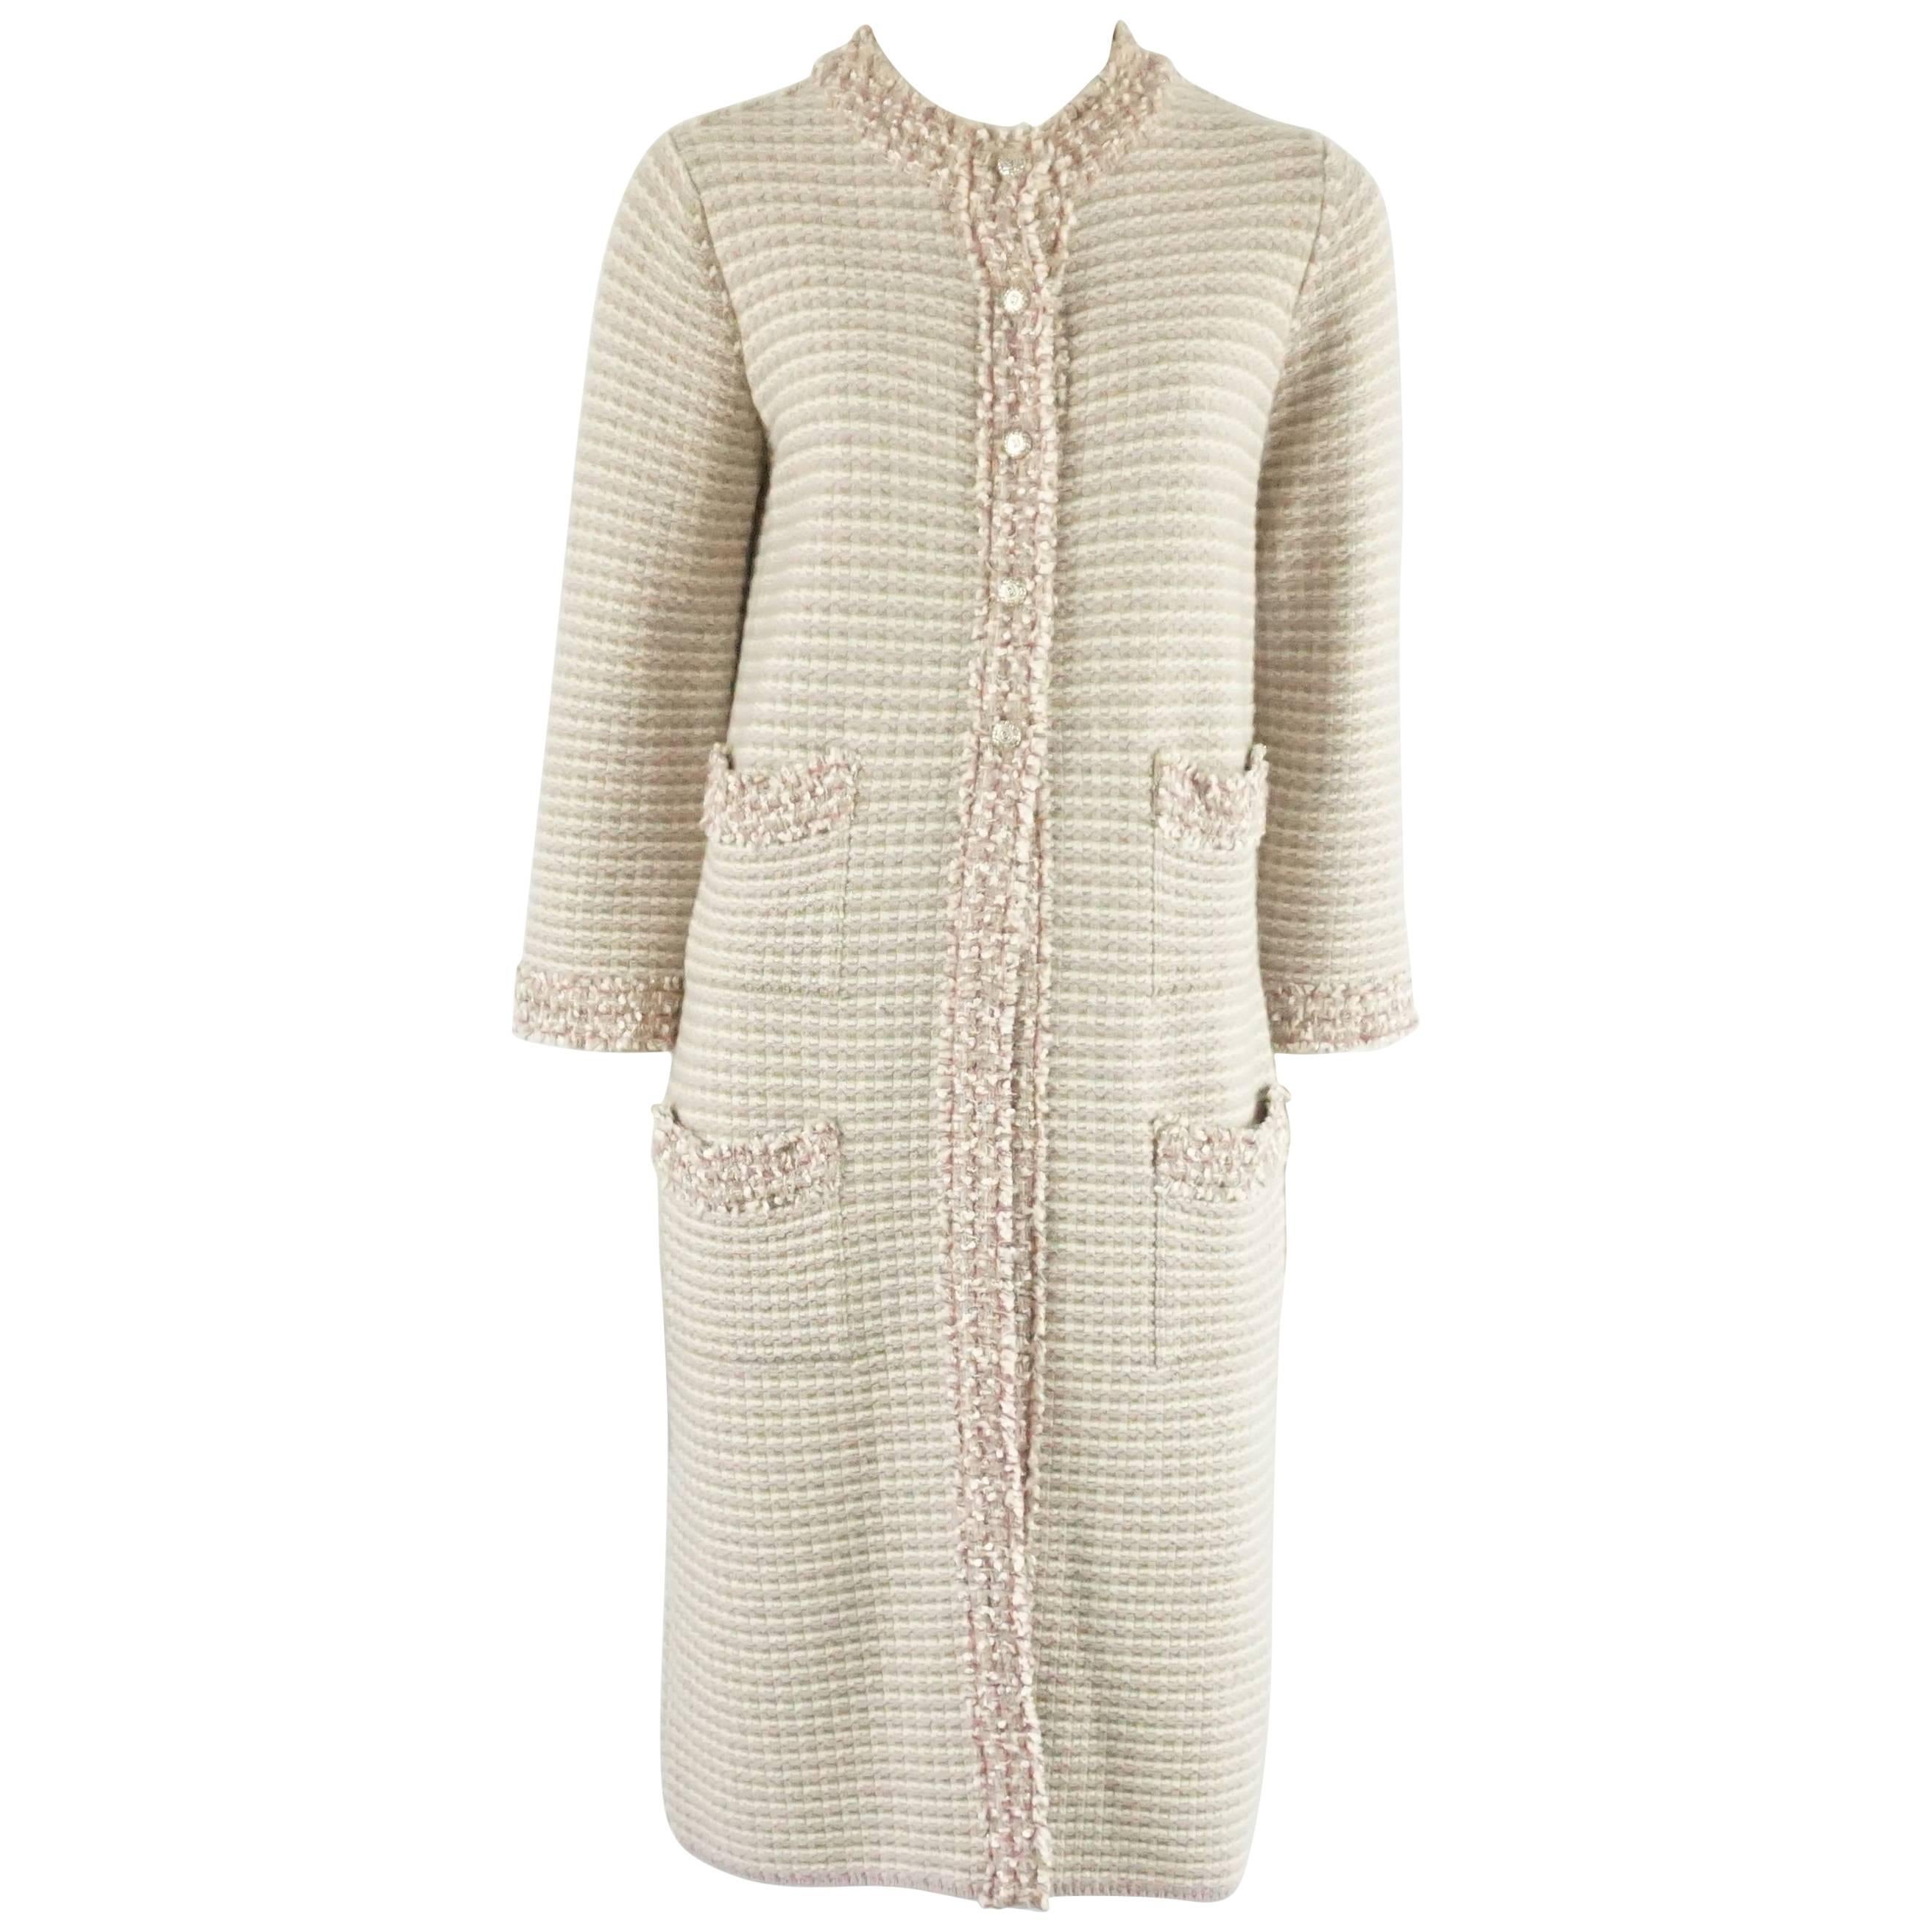 Chanel Tan, Ivory, and Rose Cashmere Blend Full Sweater Coat - 40 